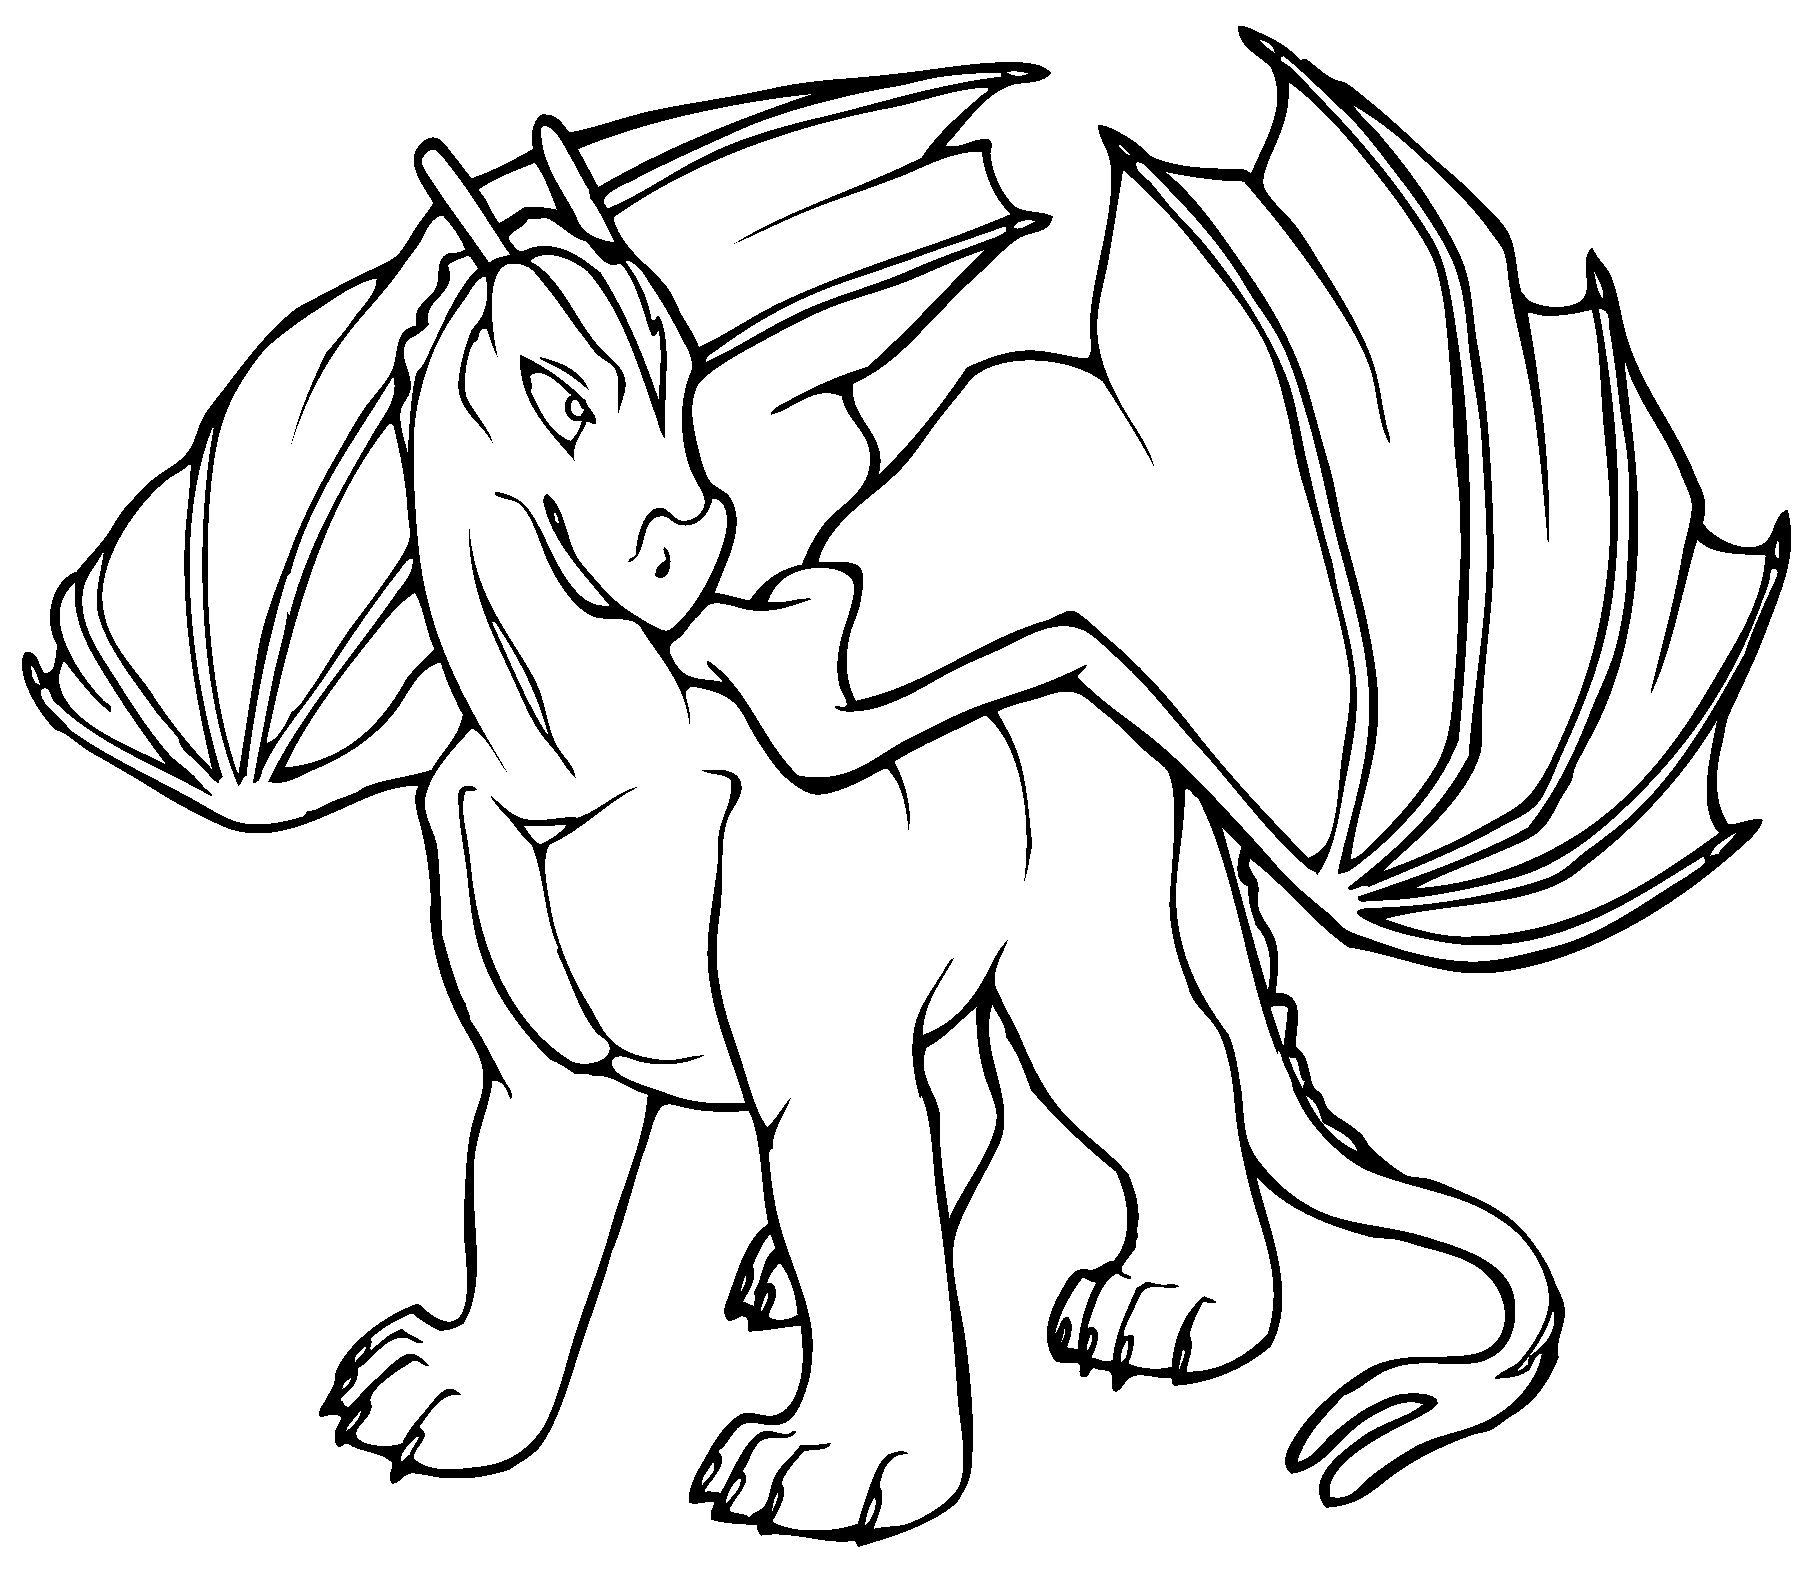 Free printable dragon coloring pages for kids dragon coloring page coloring pages to print unicorn coloring pages